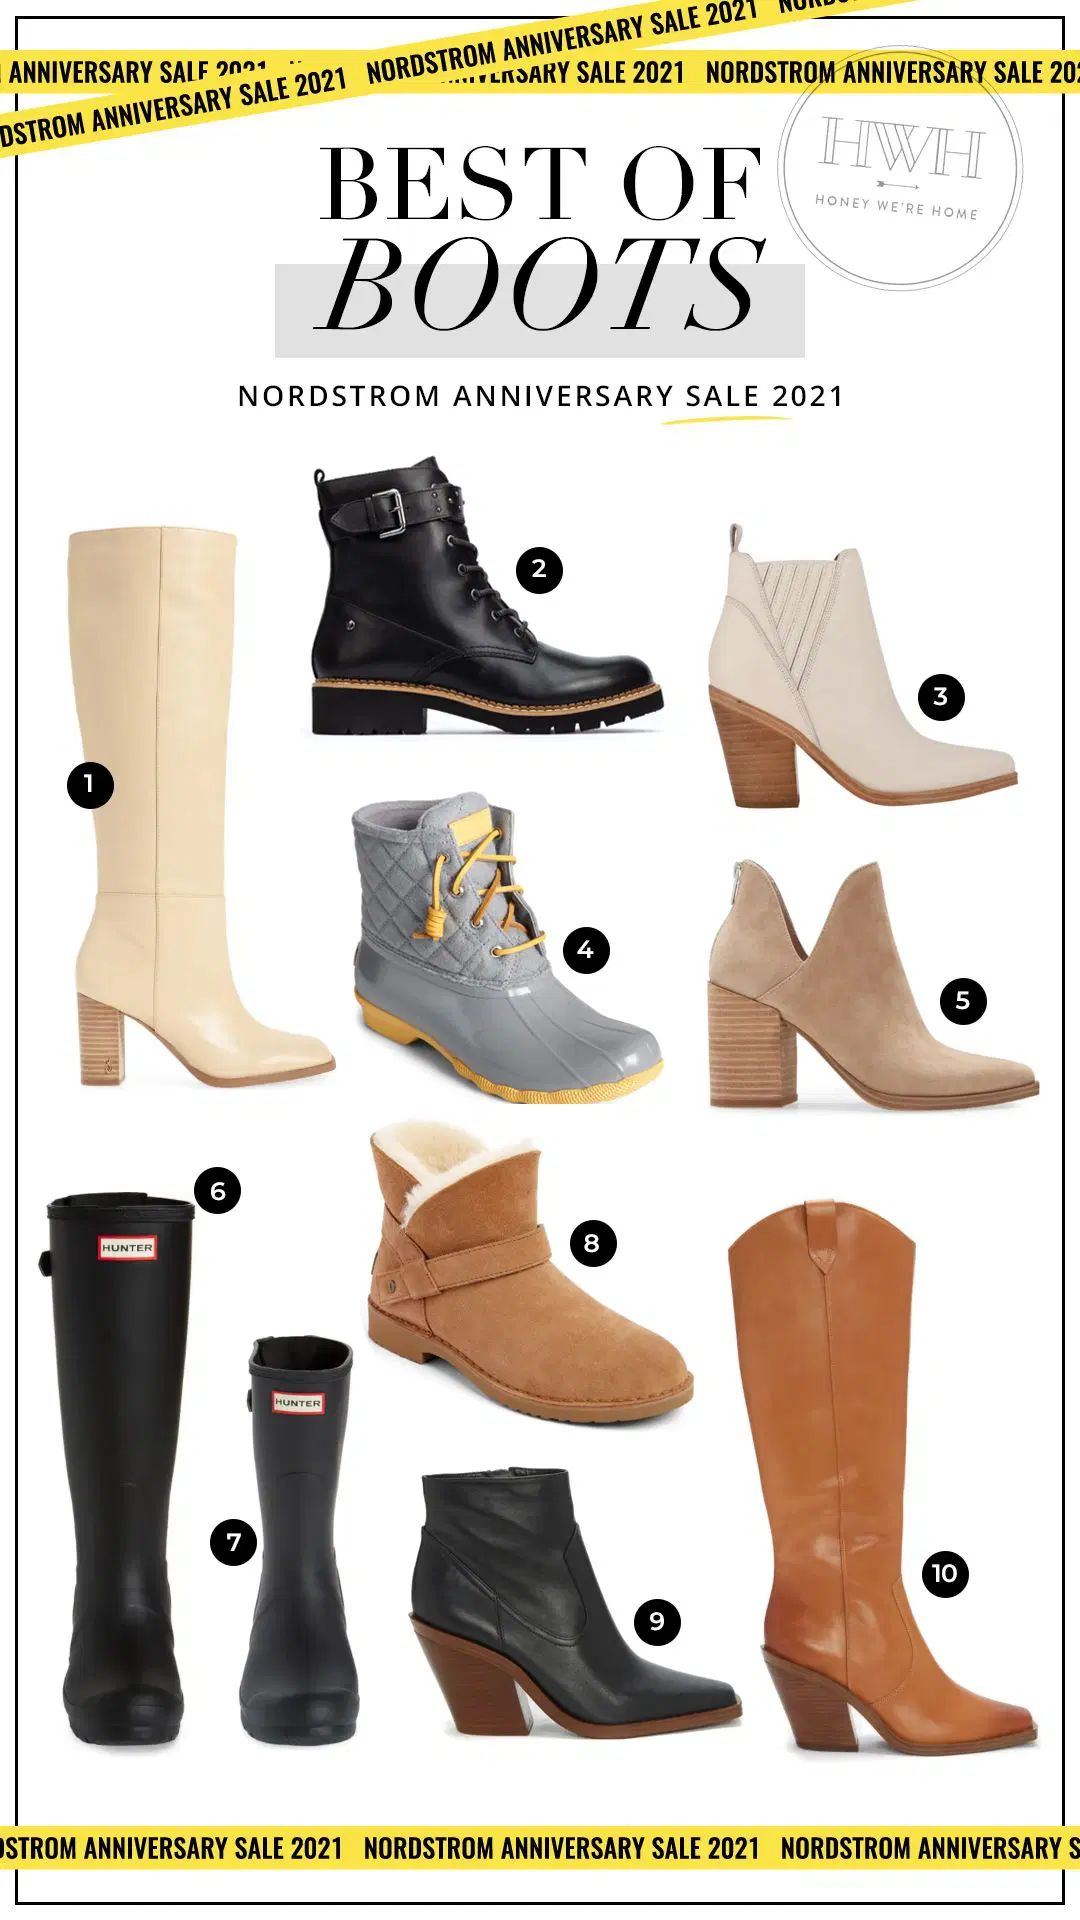 Nordstrom Anniversary Sale 2021 | Best of Boots, Shoes, Activewear, Bags & Accessories